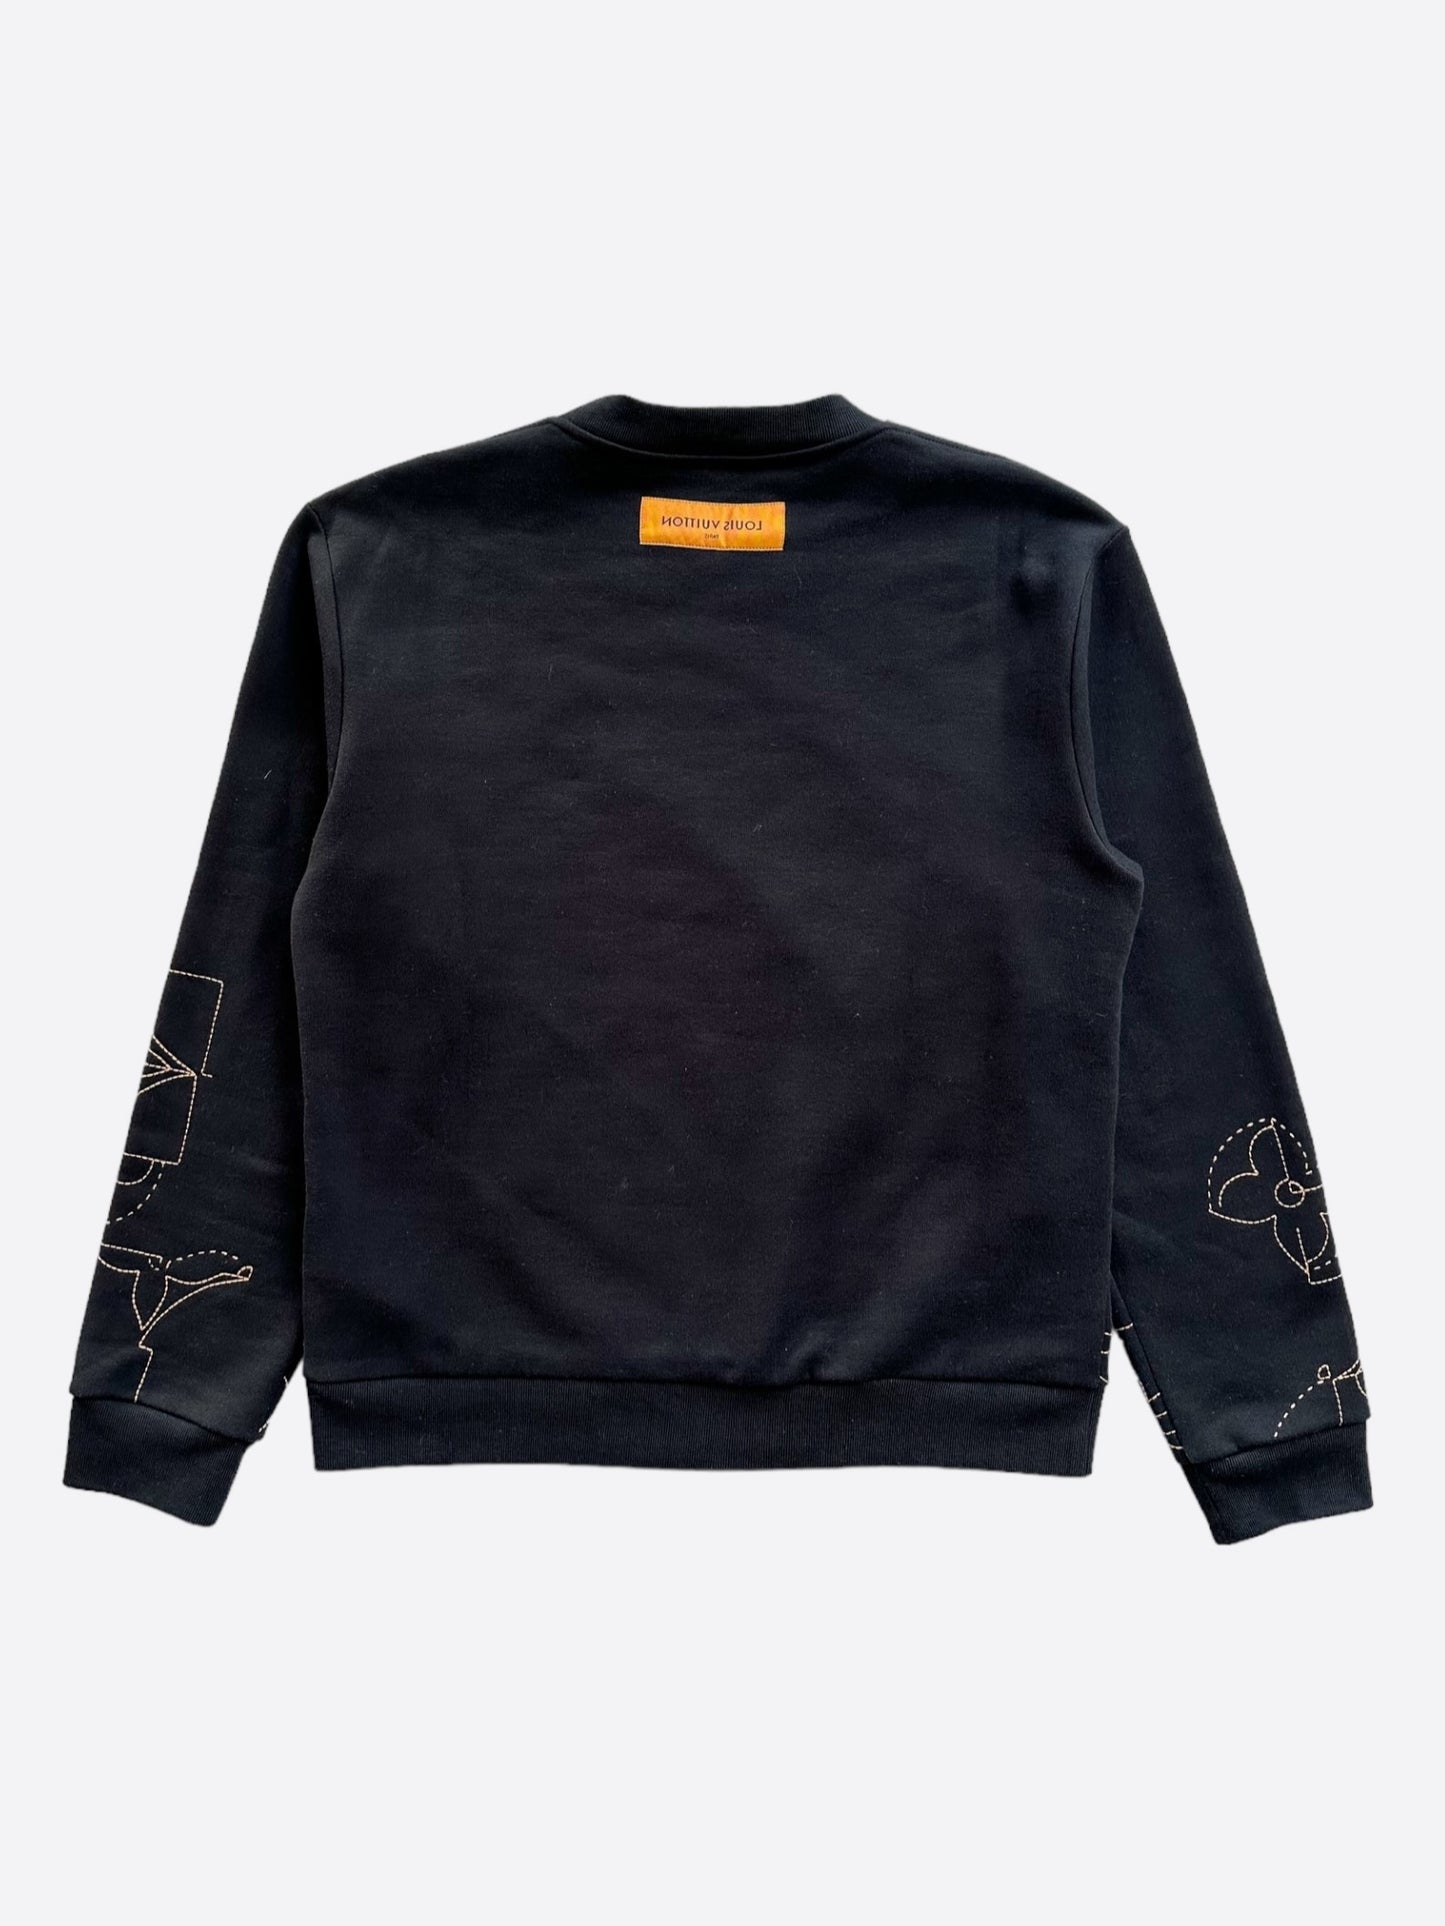 Louis Vuitton Black & Gold Music Line Embroidered Sweater